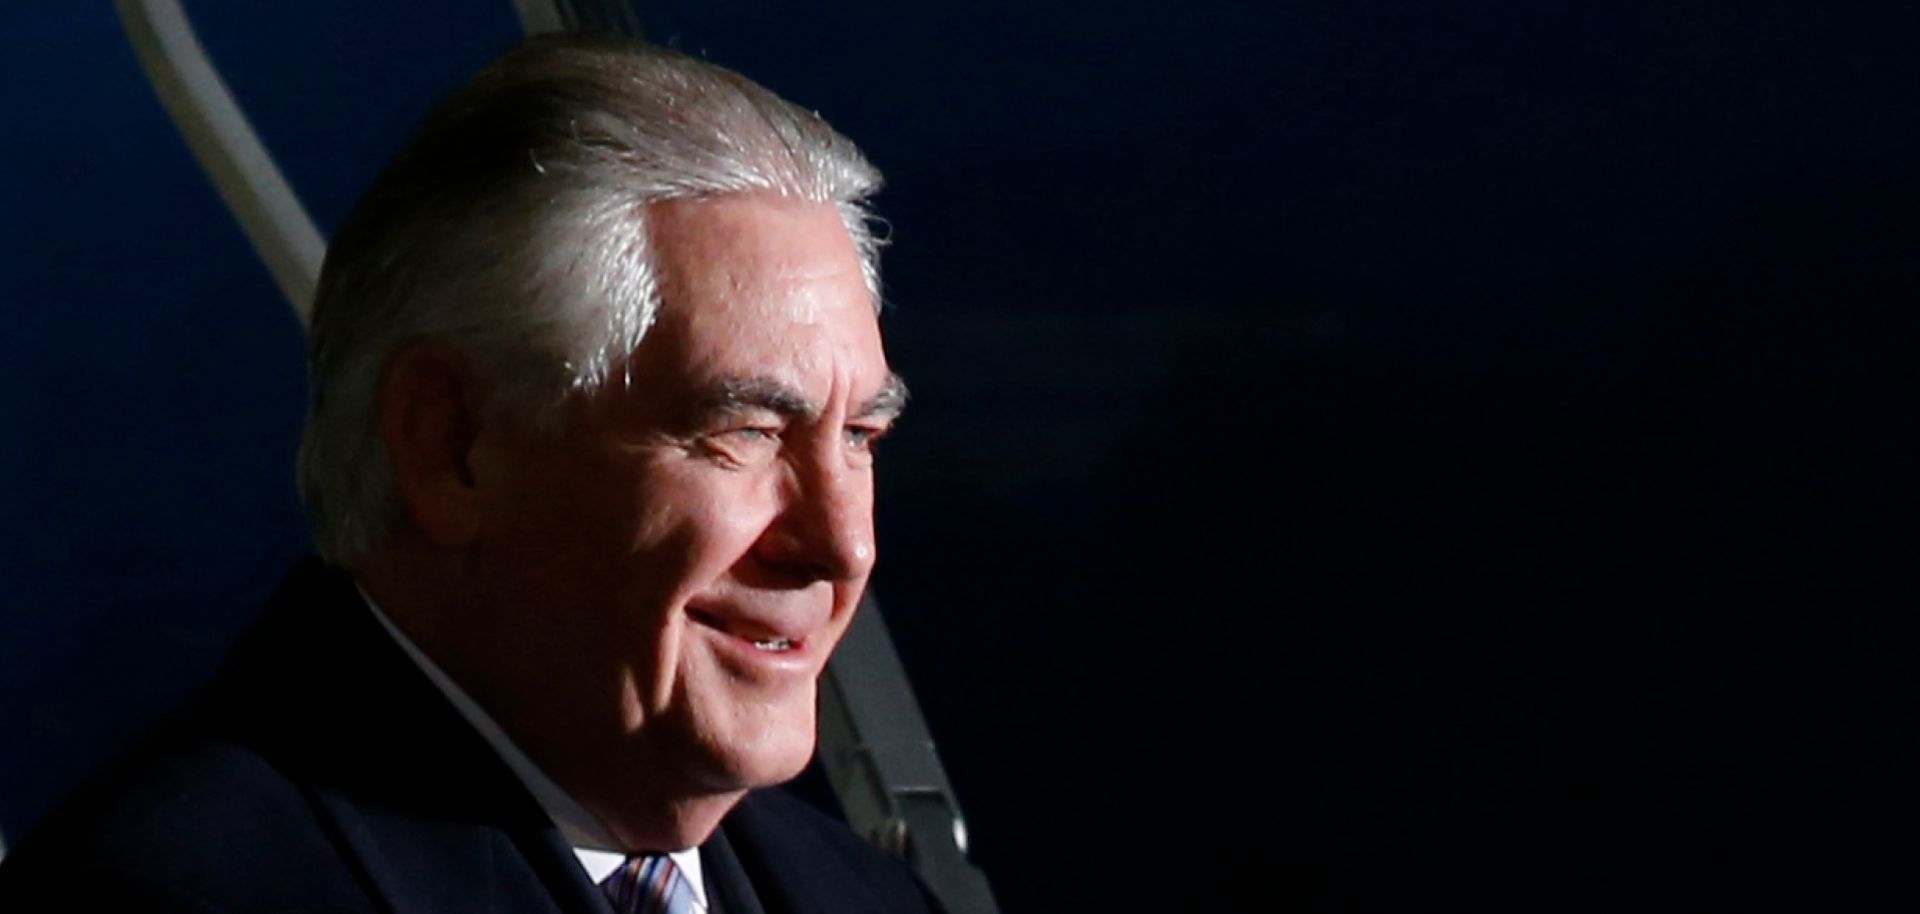 Rex Tillerson kicked off his first trip to Asia as the U.S. secretary of state on March 15 with a visit to Japan. Over the course of his three-country tour, Tillerson is expected to discuss strategies to manage North Korea's aggression.